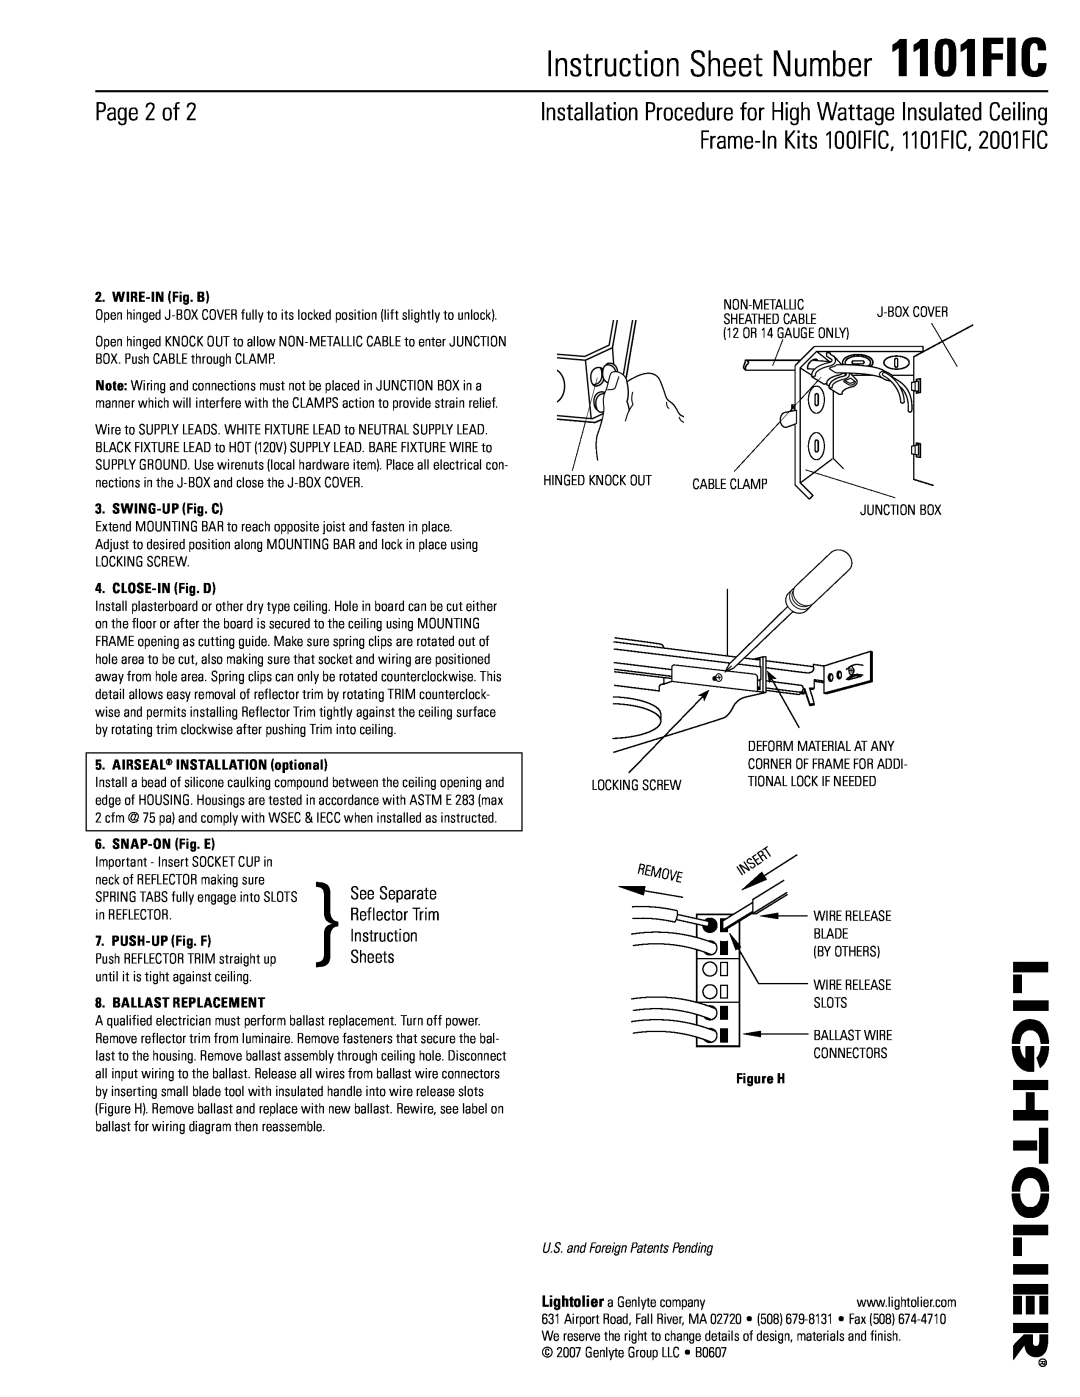 Lightolier 100IFIC instruction sheet Page of, REMOvE, Instruction Sheet Number 1101FIC, U.S. and Foreign Patents Pending 